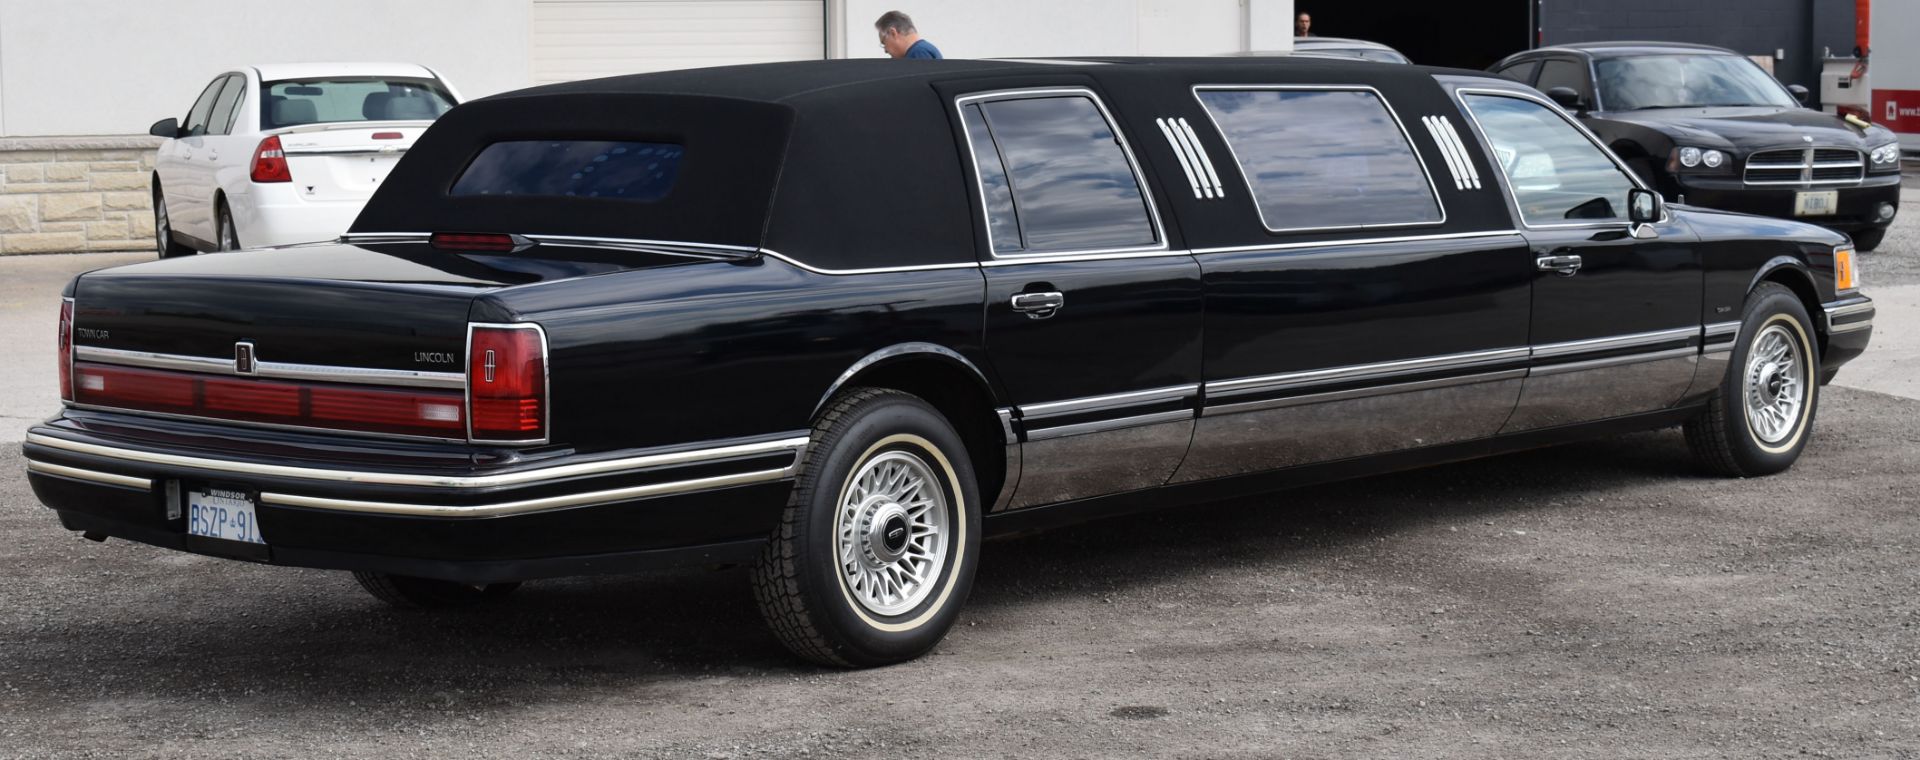 LINCOLN (1992) TOWN CAR 4 PASSENGER STRETCH LIMOUSINE WITH 8 CYLINDER 4.6L GAS ENGINE, 321,116KM ( - Image 4 of 21